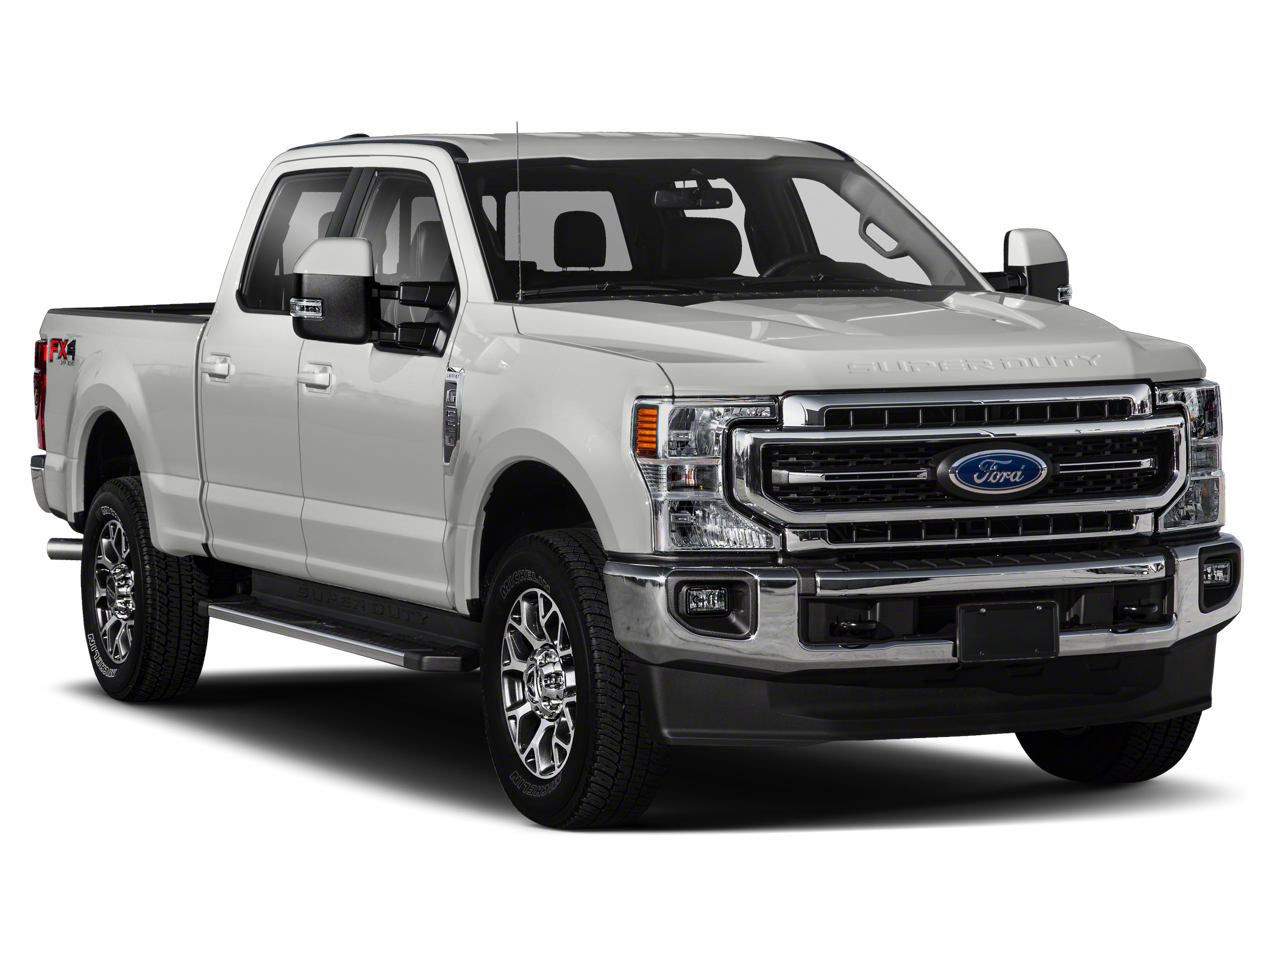 2021 Ford F-250SD Lariat rousch pkg lifted